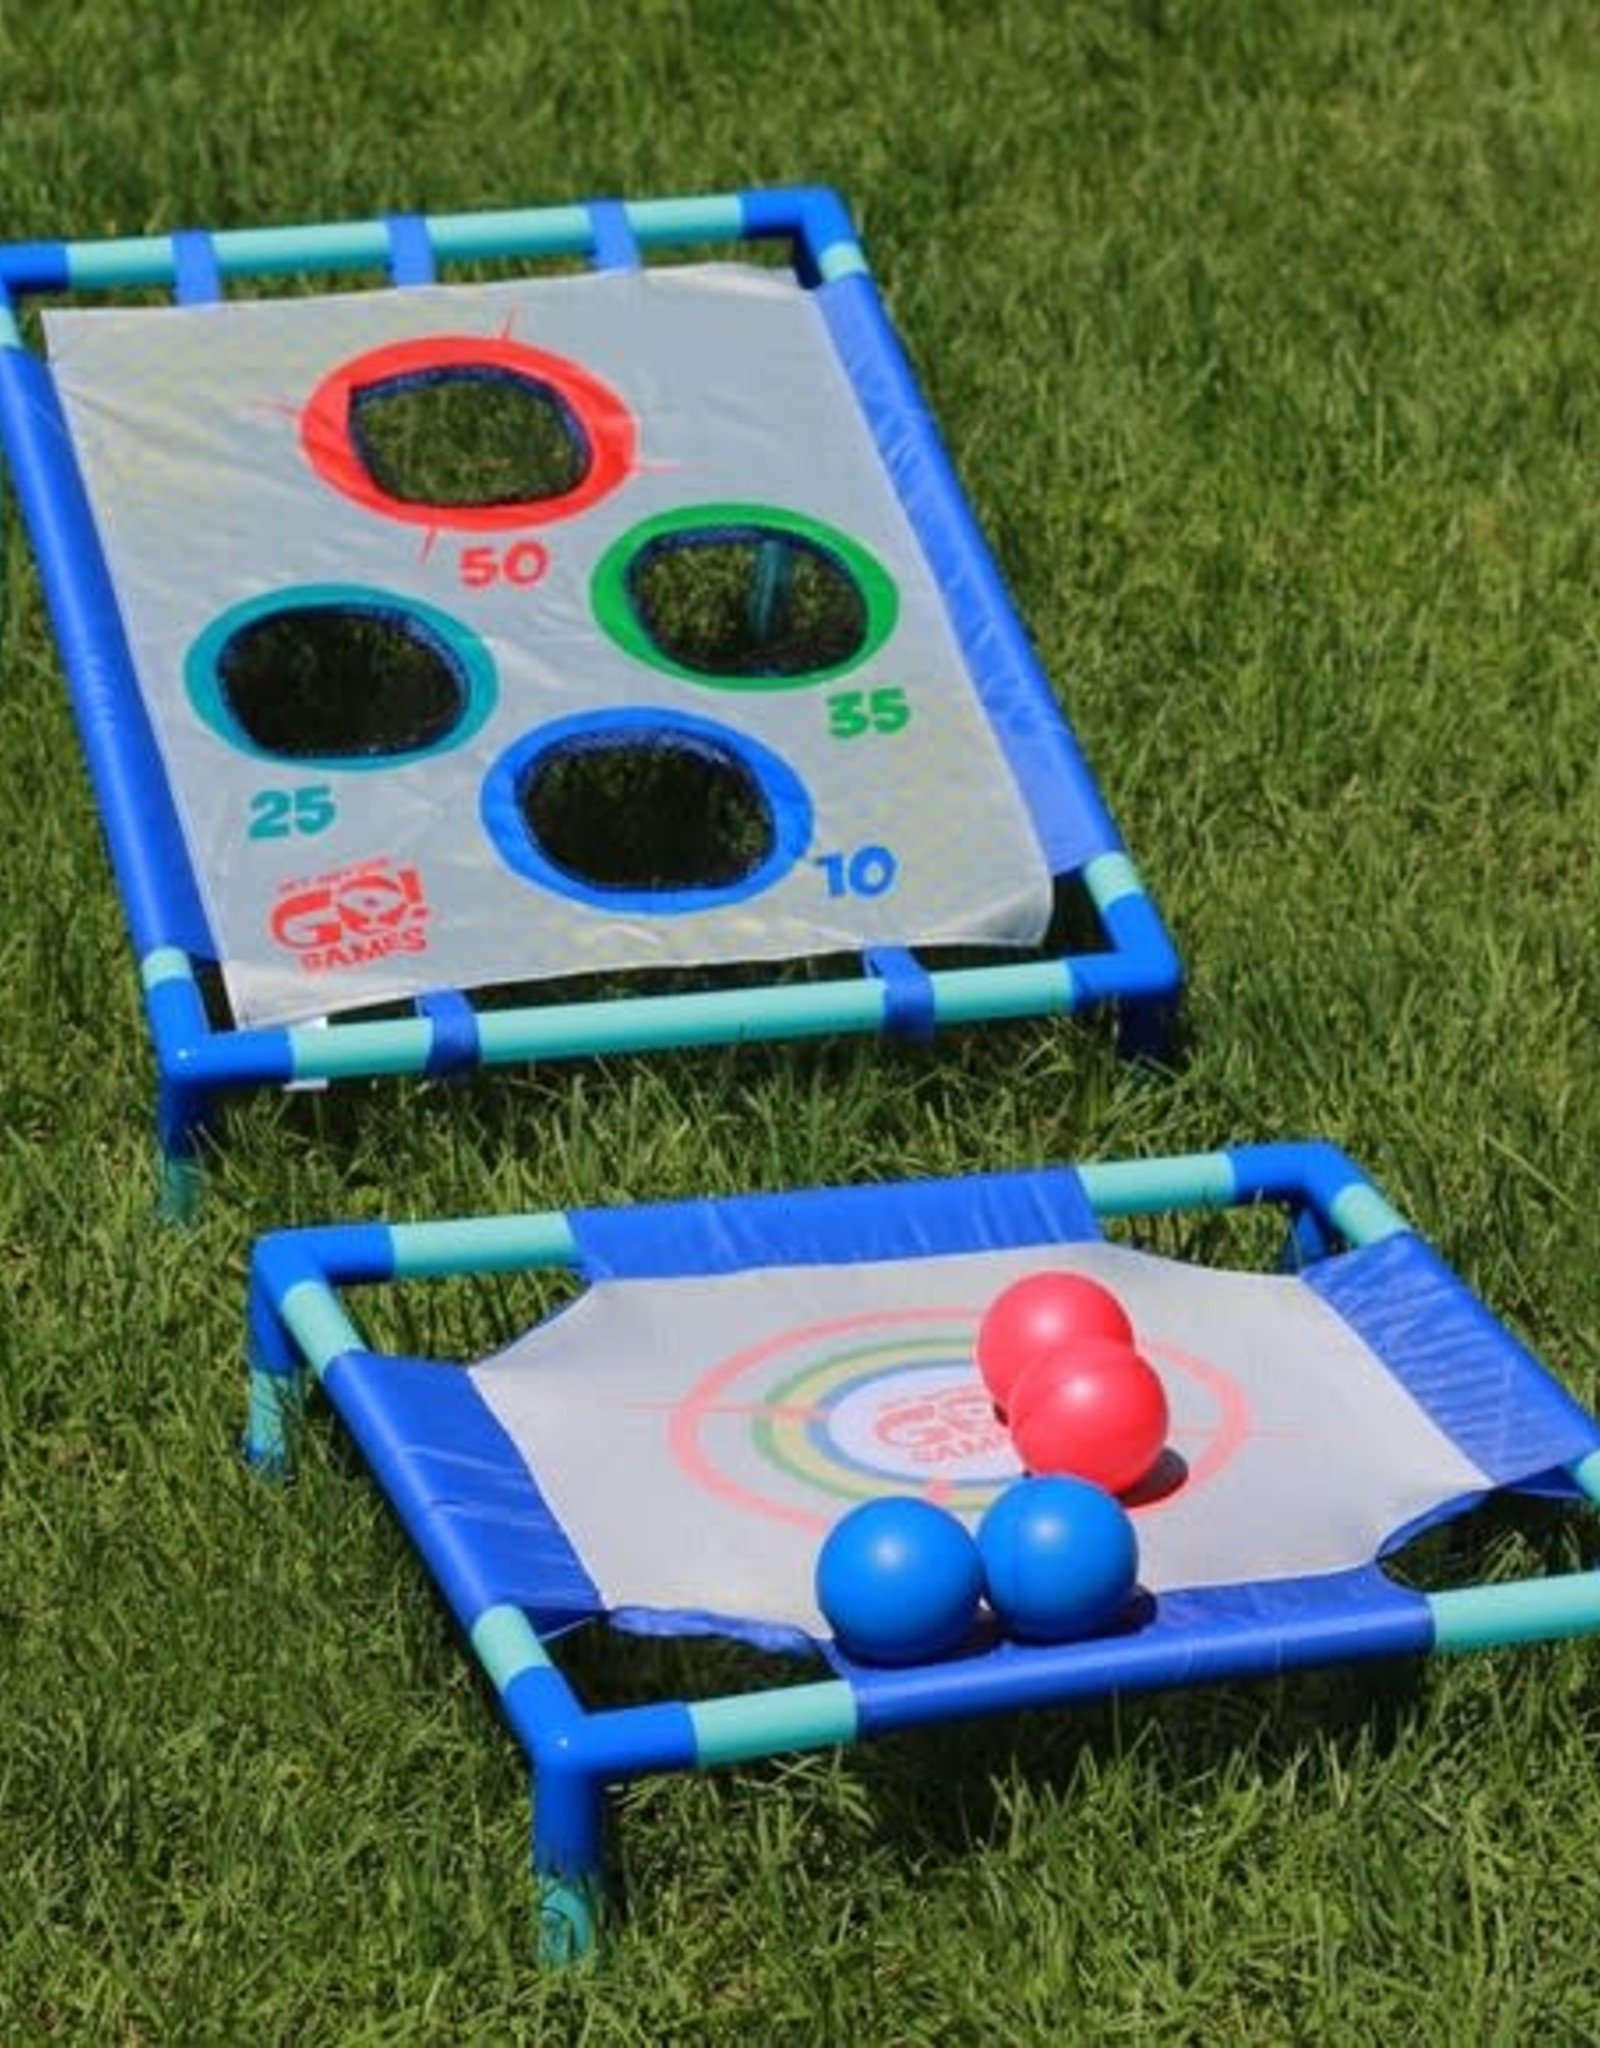 Toysmith Spring N Score Bounce Game *Not available for shipping. Pick up only.